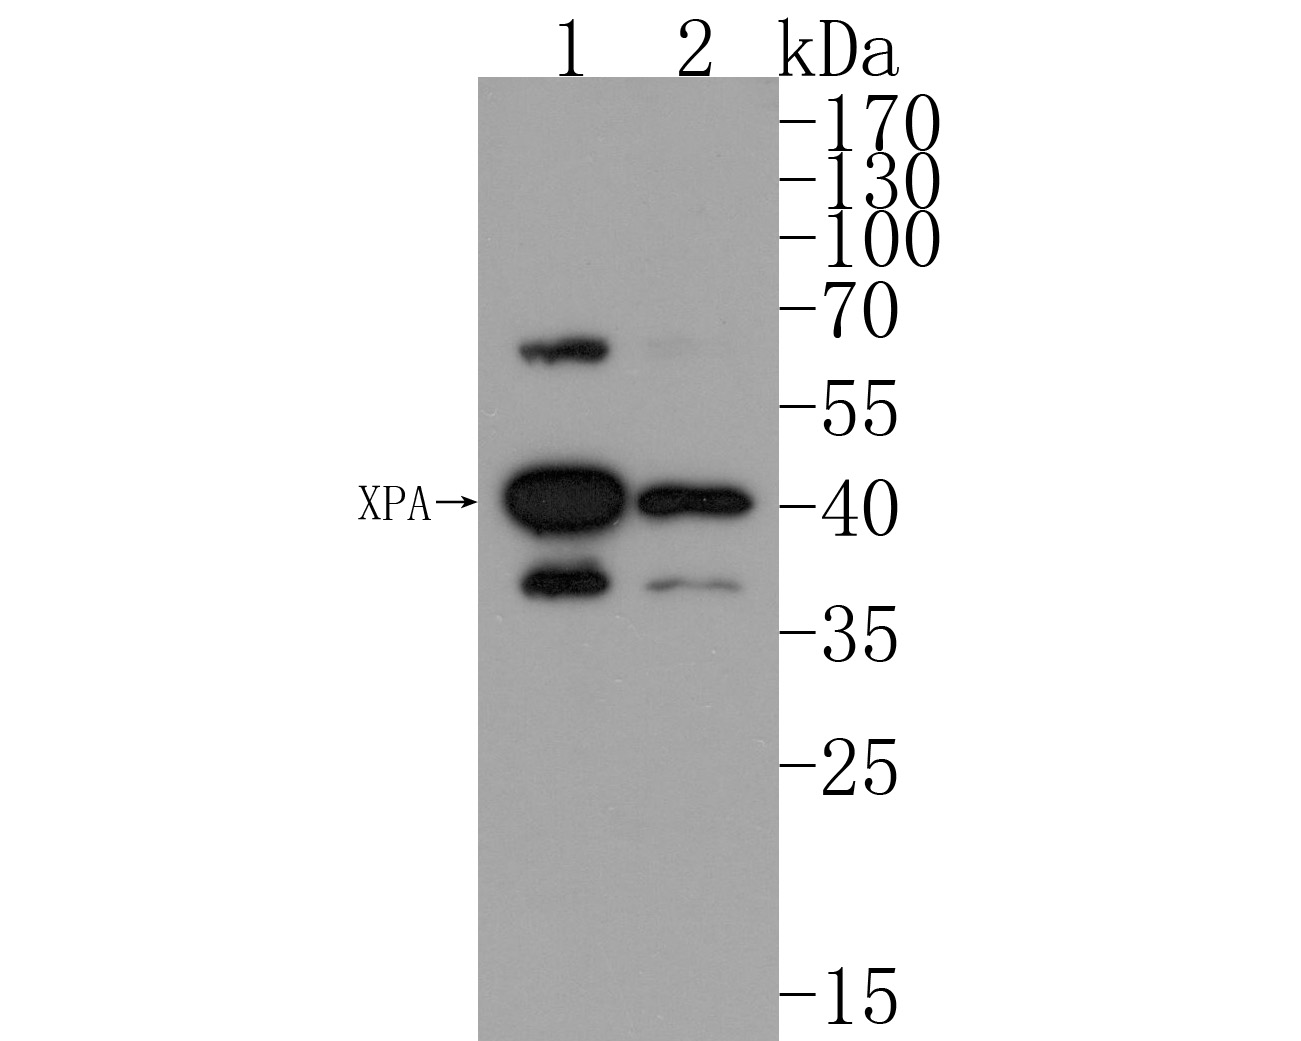 Western blot analysis of XPA on different lysates. Proteins were transferred to a PVDF membrane and blocked with 5% BSA in PBS for 1 hour at room temperature. The primary antibody (HA500133, 1/500) was used in 5% BSA at room temperature for 2 hours. Goat Anti-Rabbit IgG - HRP Secondary Antibody (HA1001) at 1:200,000 dilution was used for 1 hour at room temperature.<br />
Positive control: <br />
Lane 1: Hela cell lysate<br />
Lane 2: A431 cell lysate